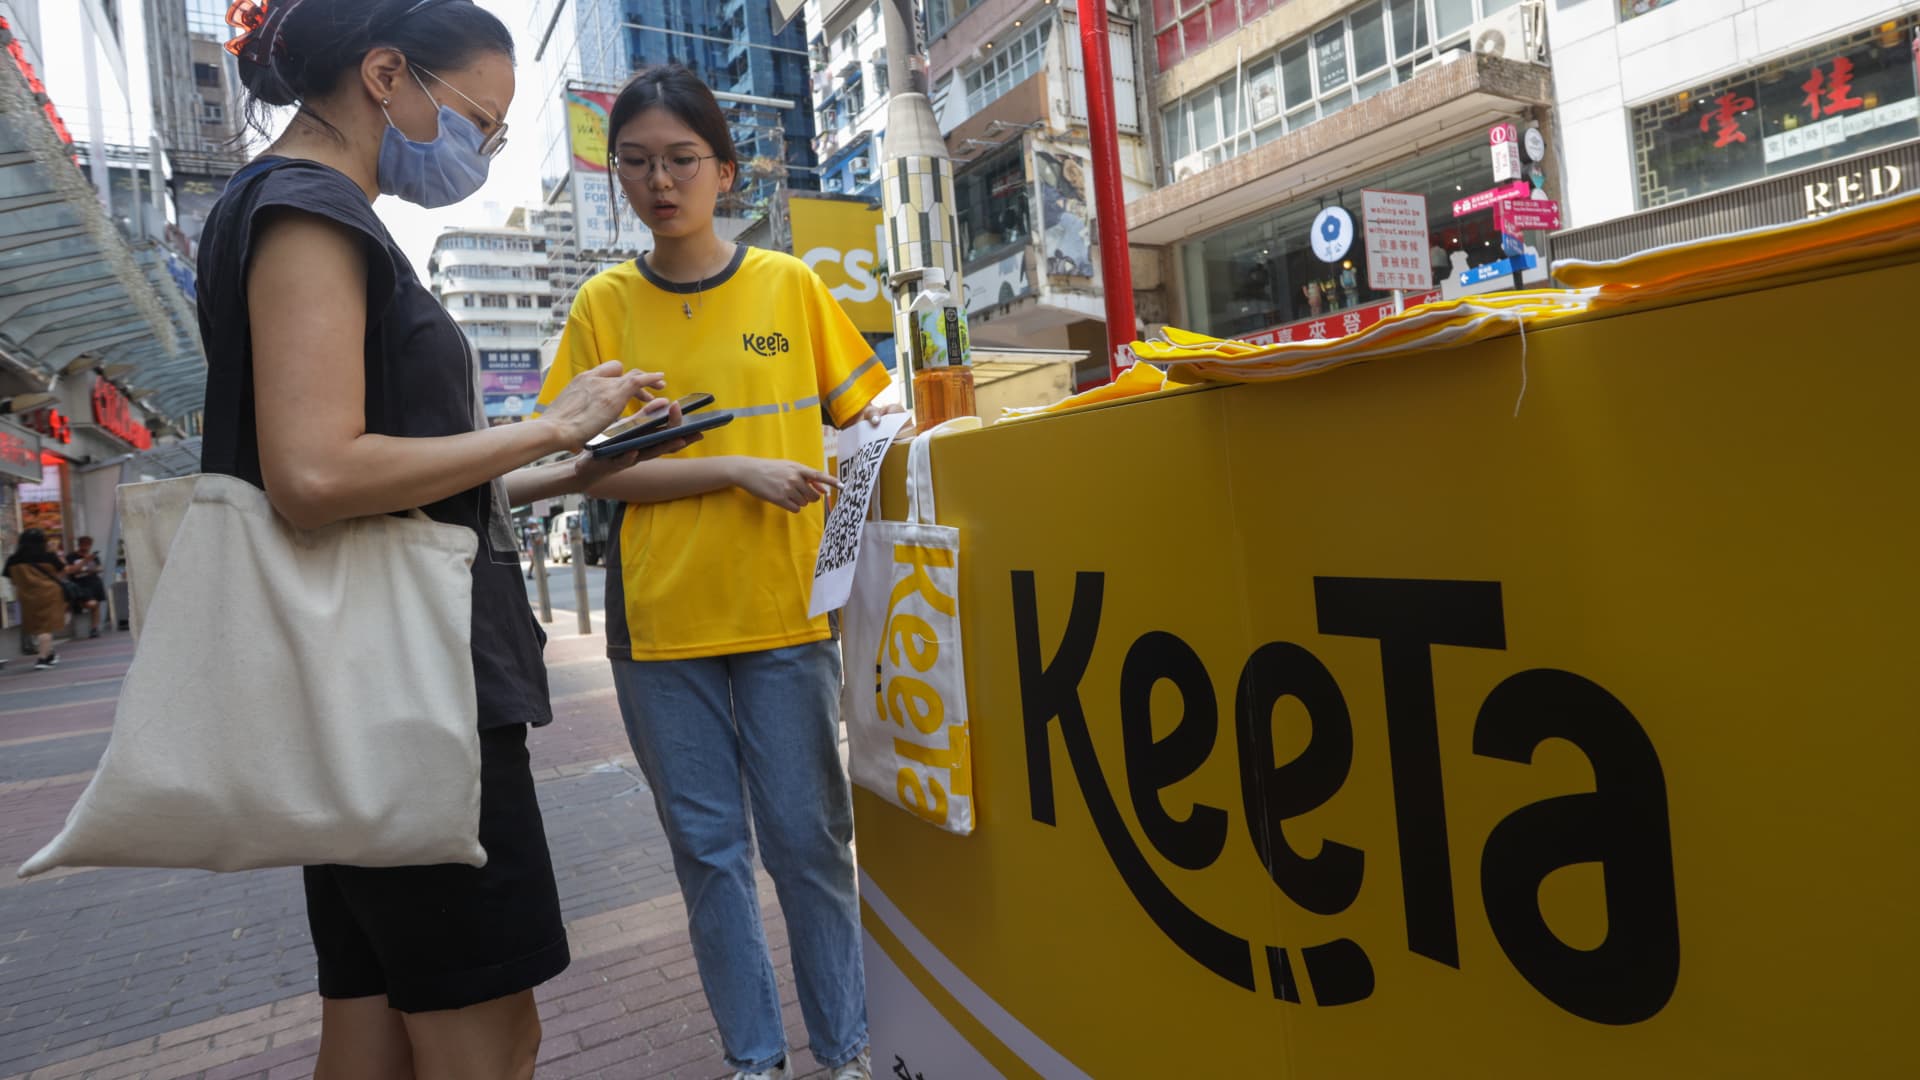 Meituan’s KeeTa joins Hong Kong’s food delivery race — but analysts are skeptical